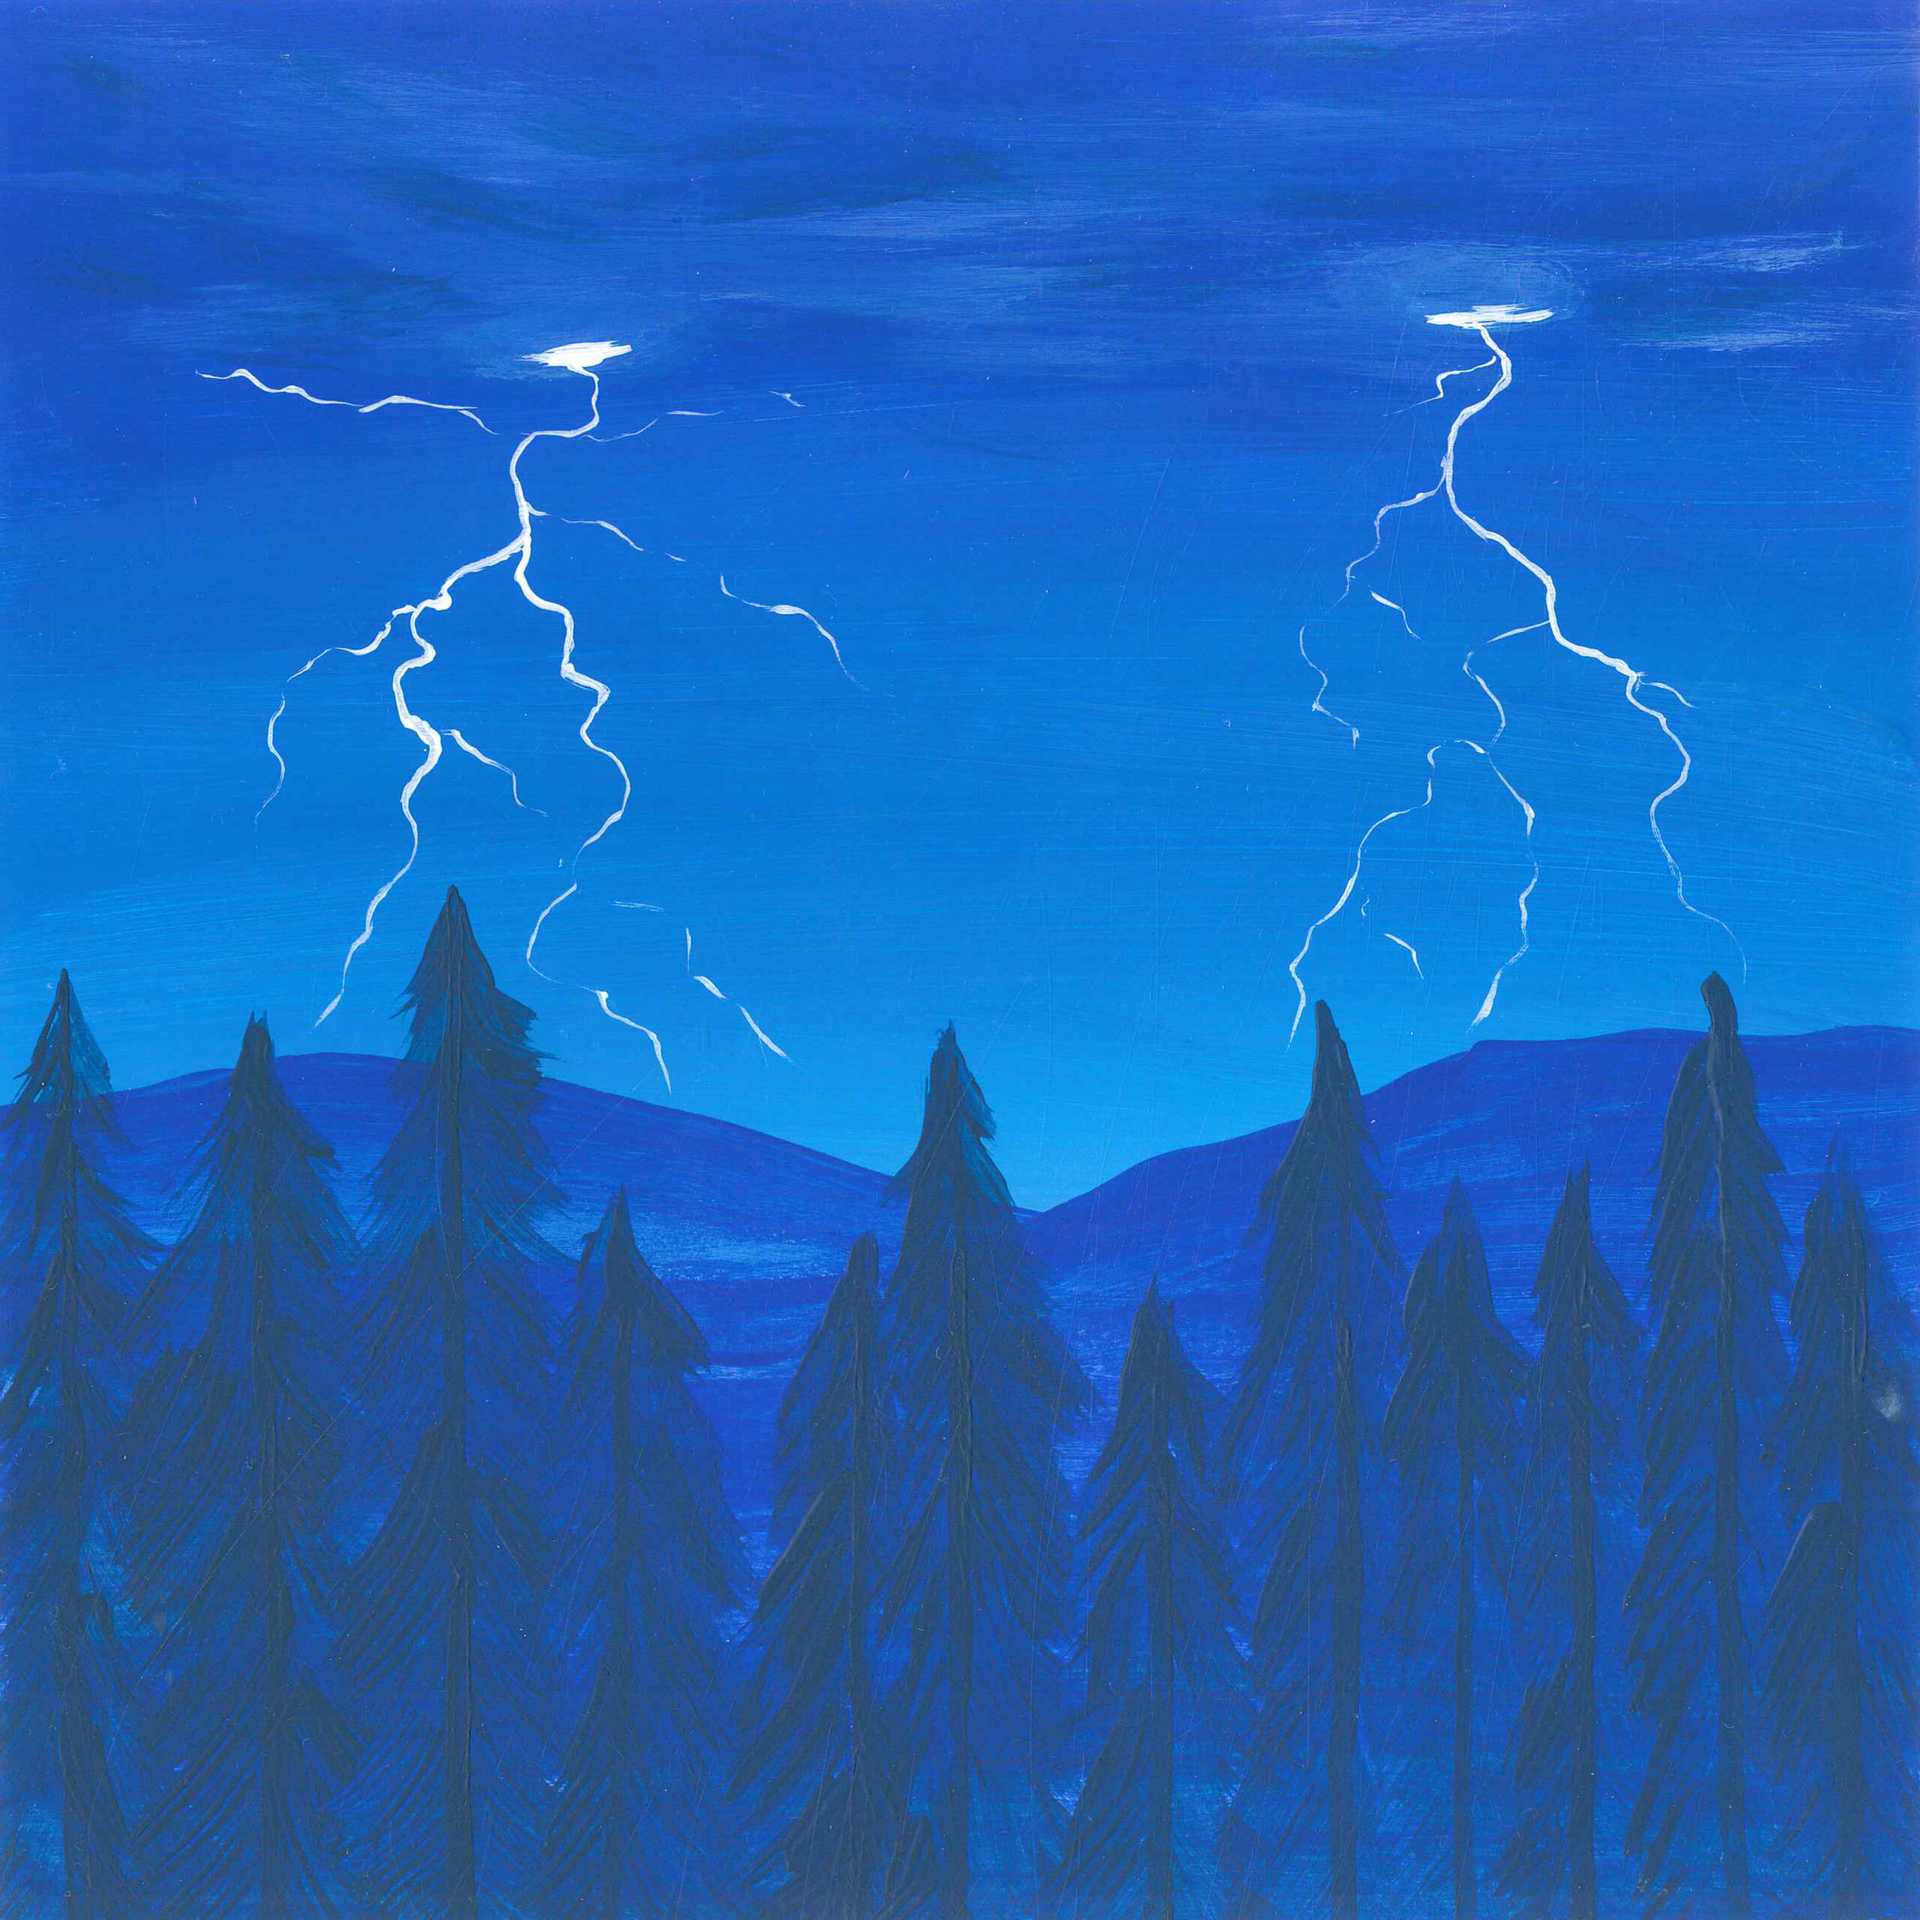 Thunderstorm in Himalayas - nature landscape painting - earth.fm